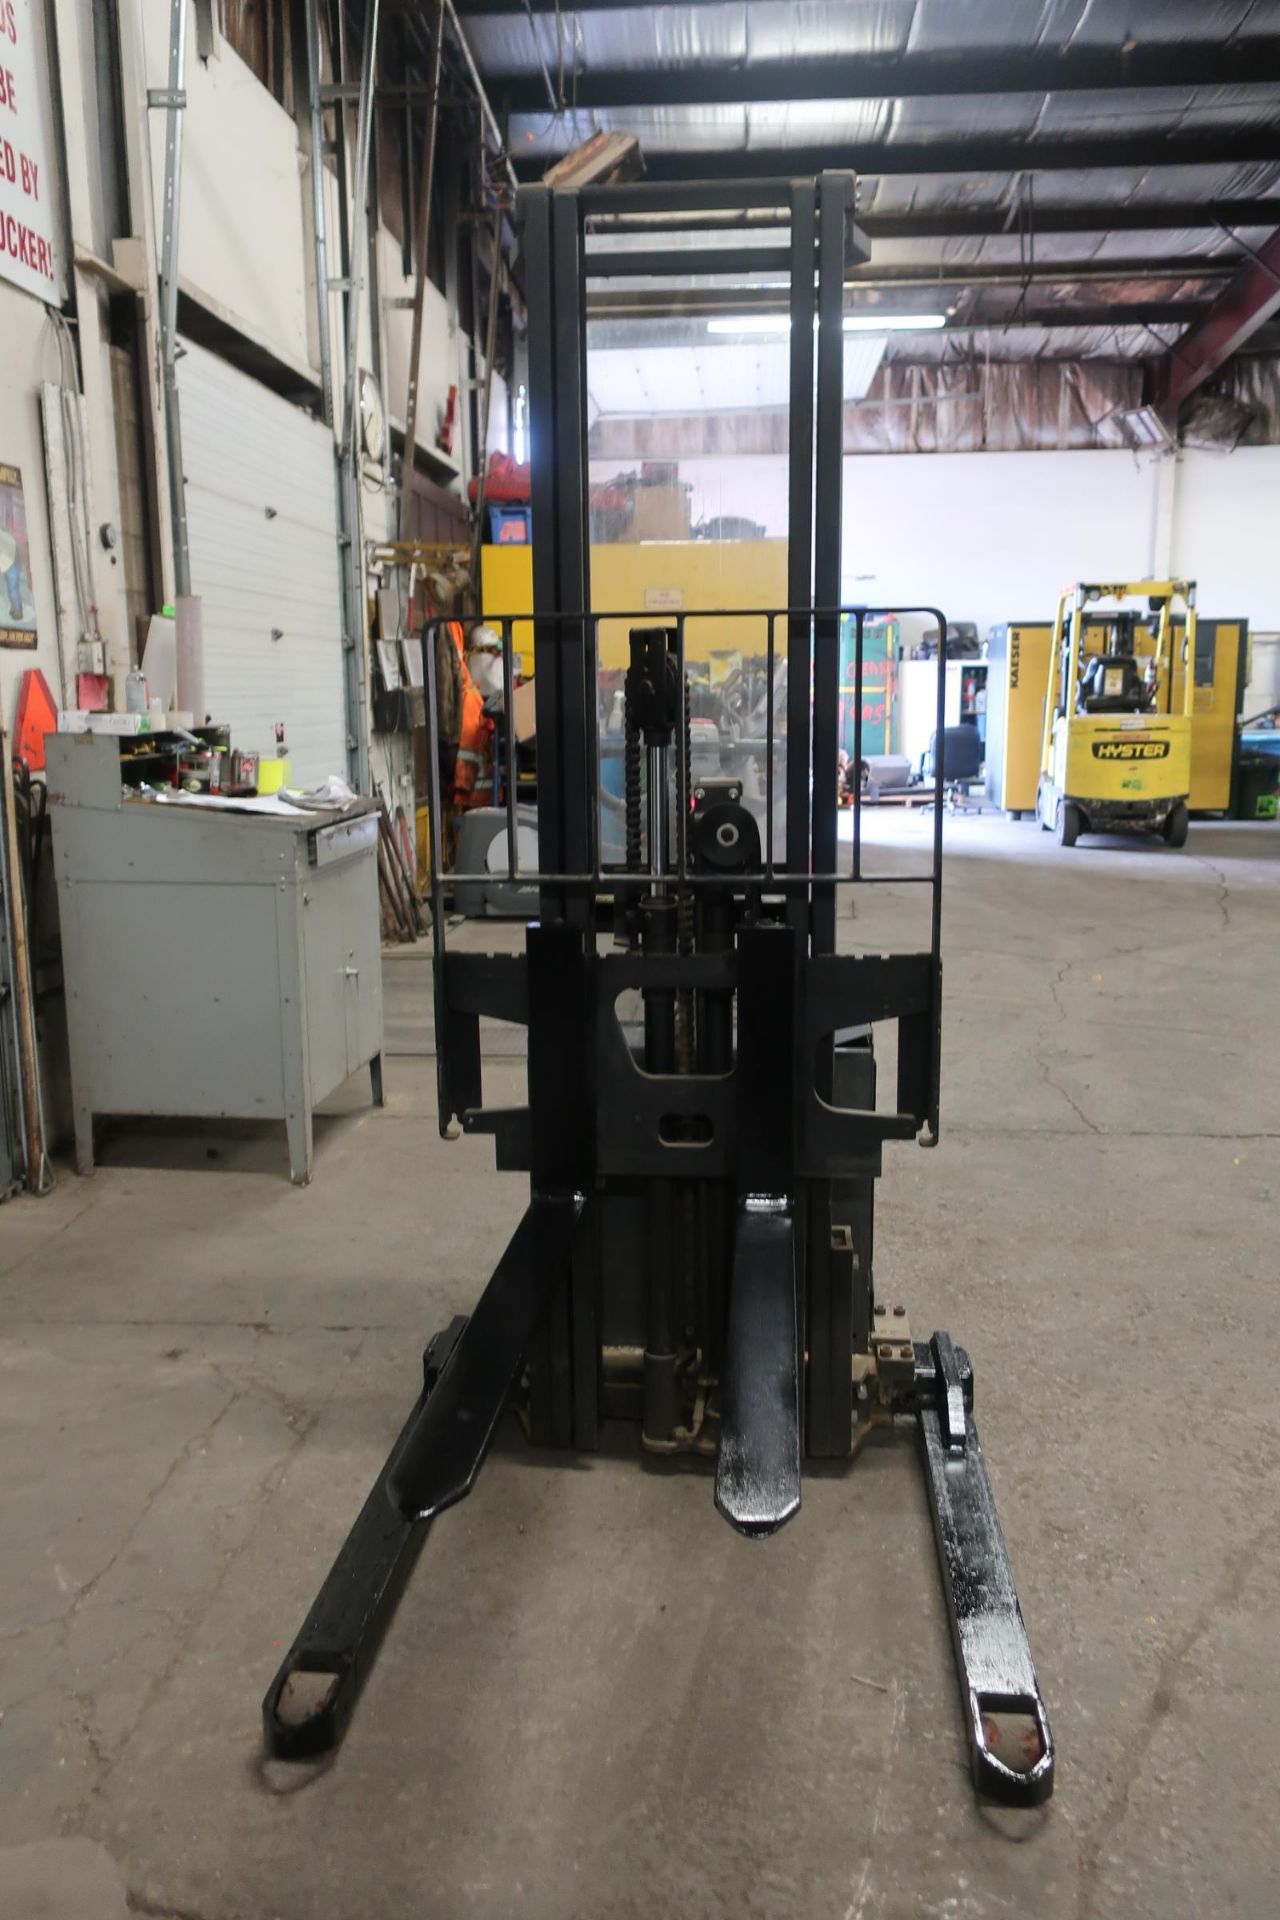 Prime Mover Walk Behind Powered Pallet Cart Walkie Lift unit 1600lbs capacity 2 stage - Image 2 of 3